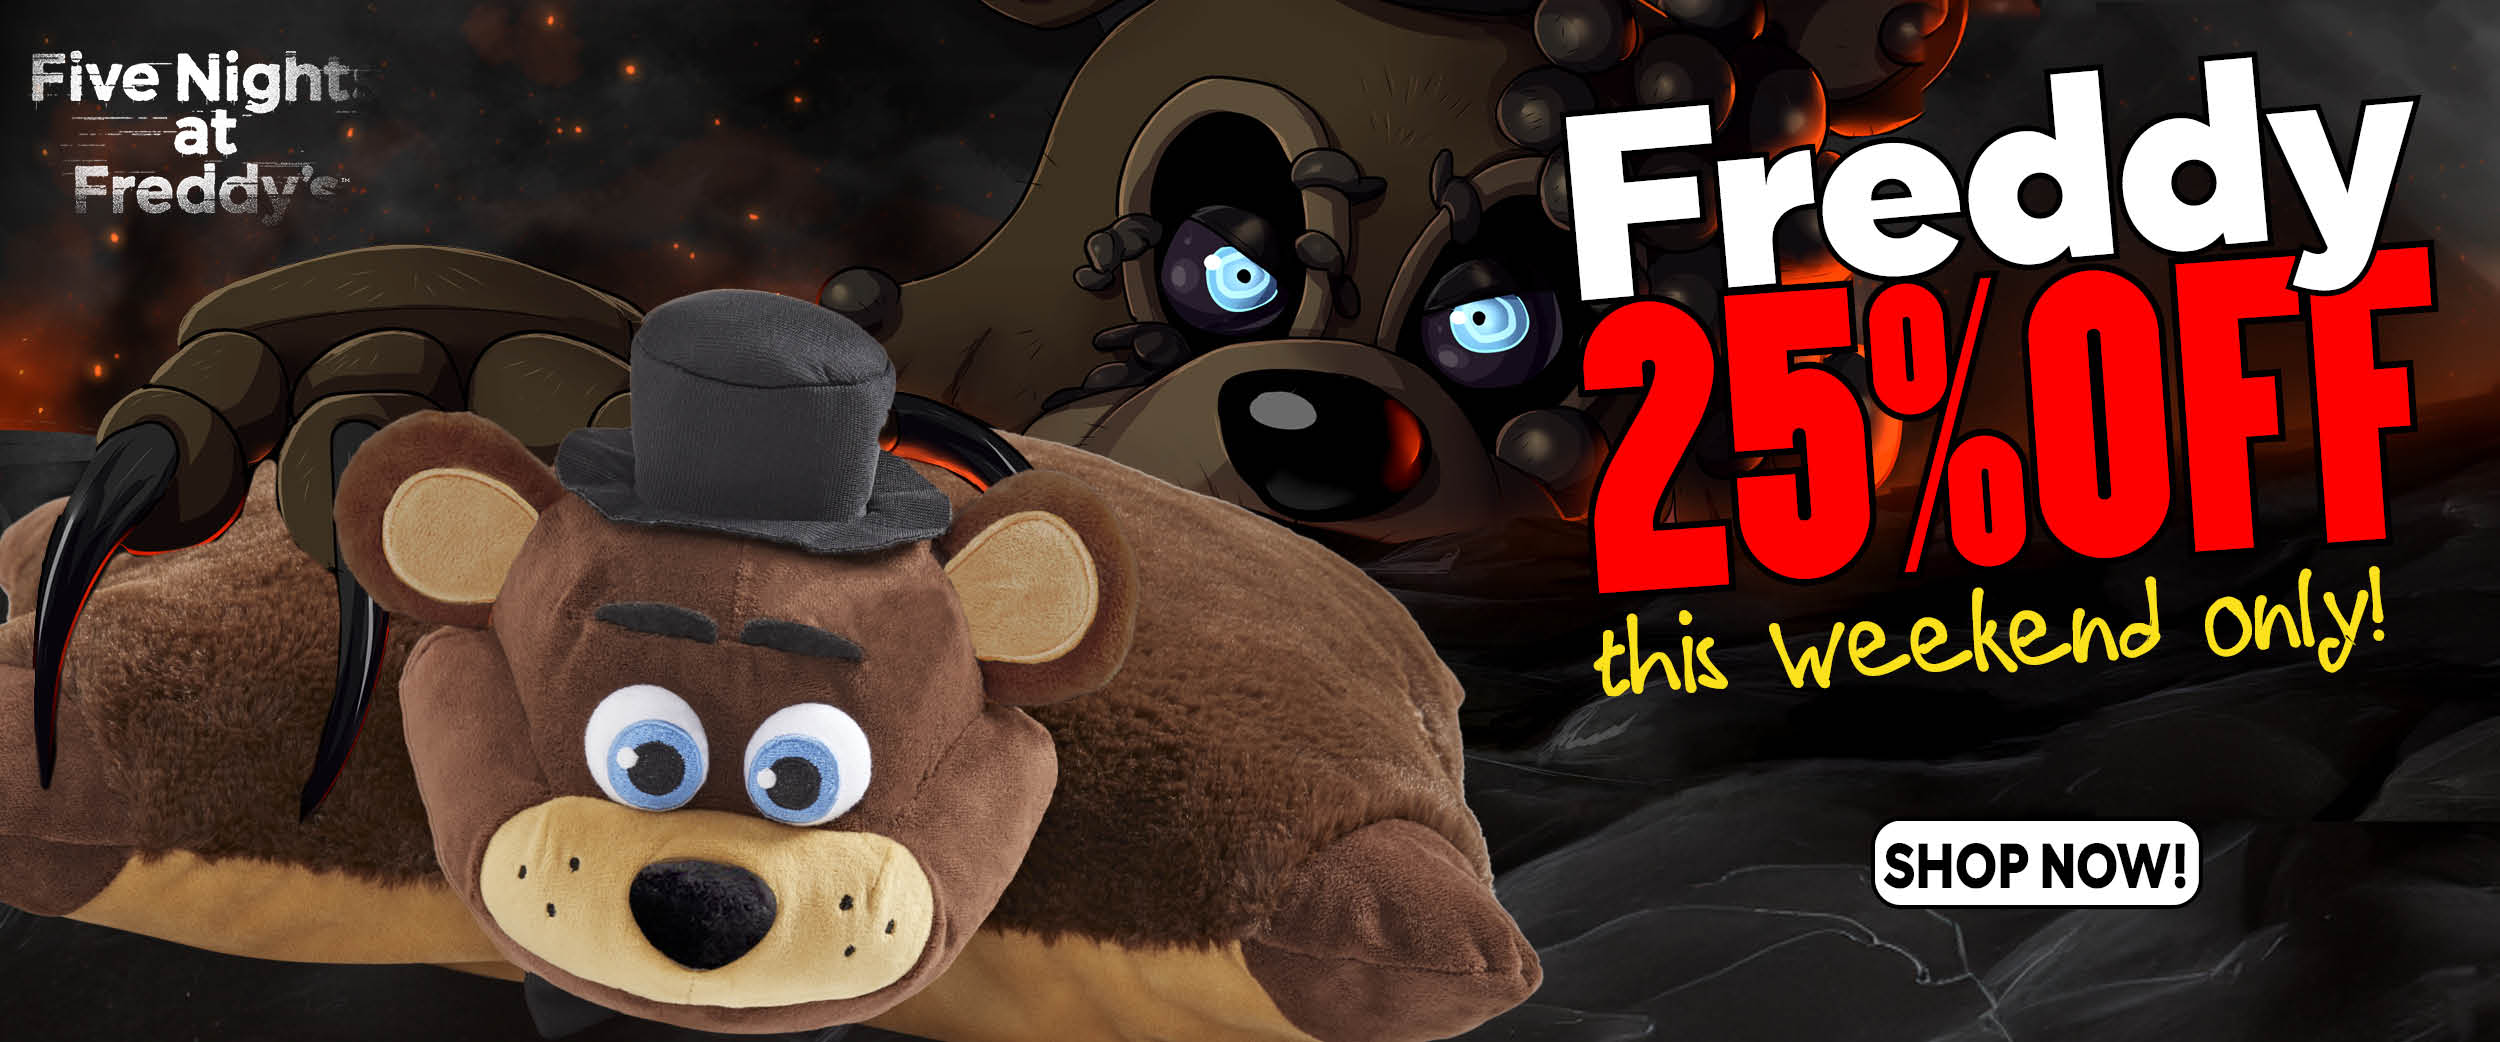 Five Nights at Freddys sale this weekend only! Get Freddy for 25% Off! Shop now.